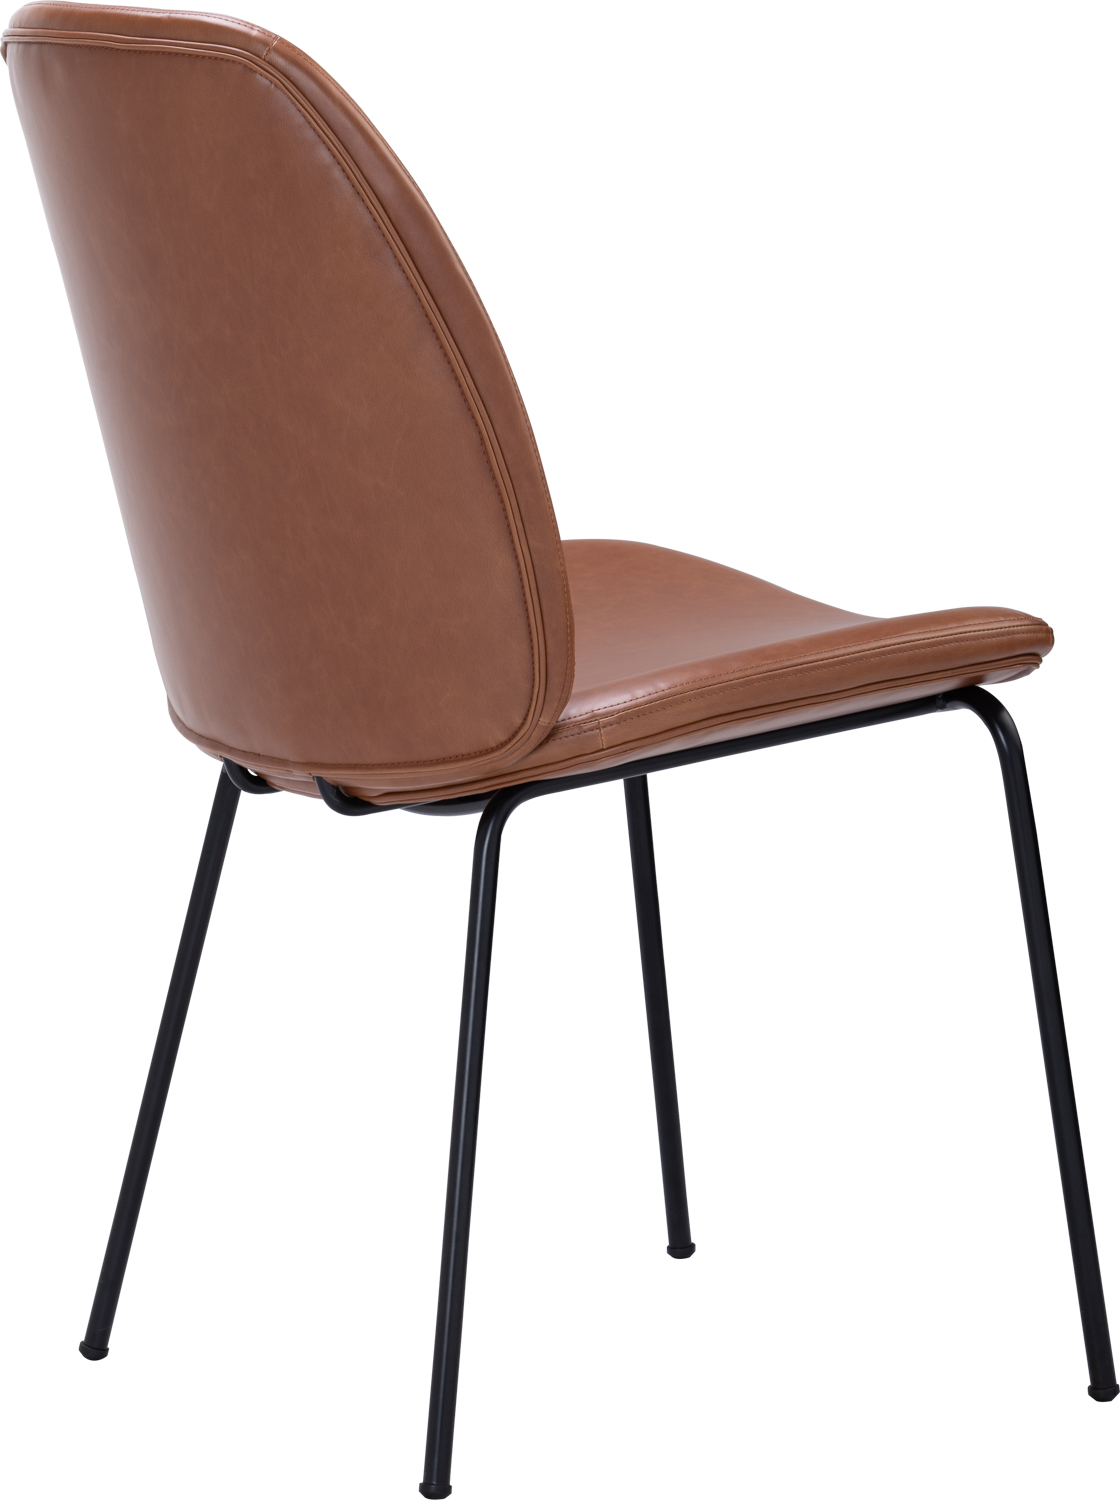 ADELE DINING CHAIR 802/547